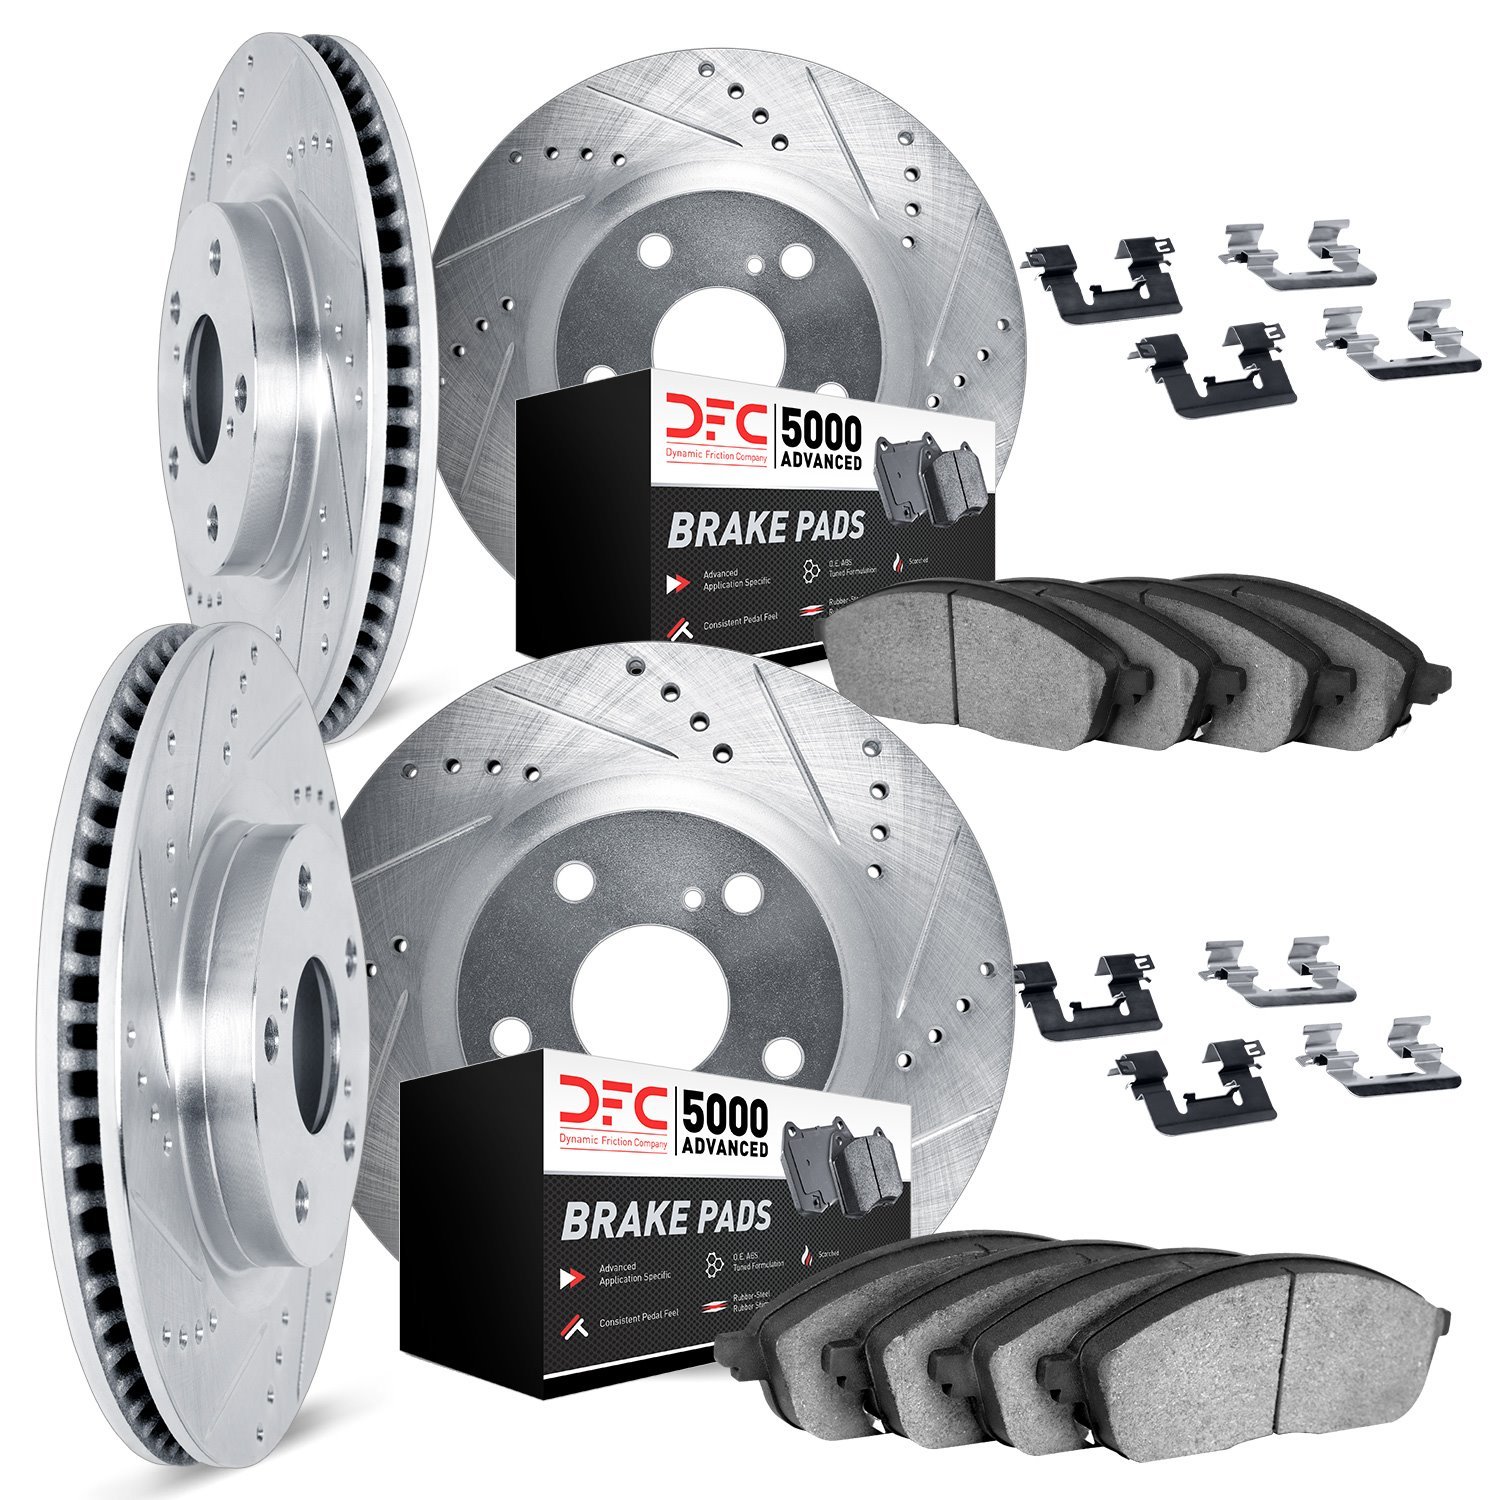 7514-31004 Drilled/Slotted Brake Rotors w/5000 Advanced Brake Pads Kit & Hardware [Silver], 2001-2005 BMW, Position: Front and R